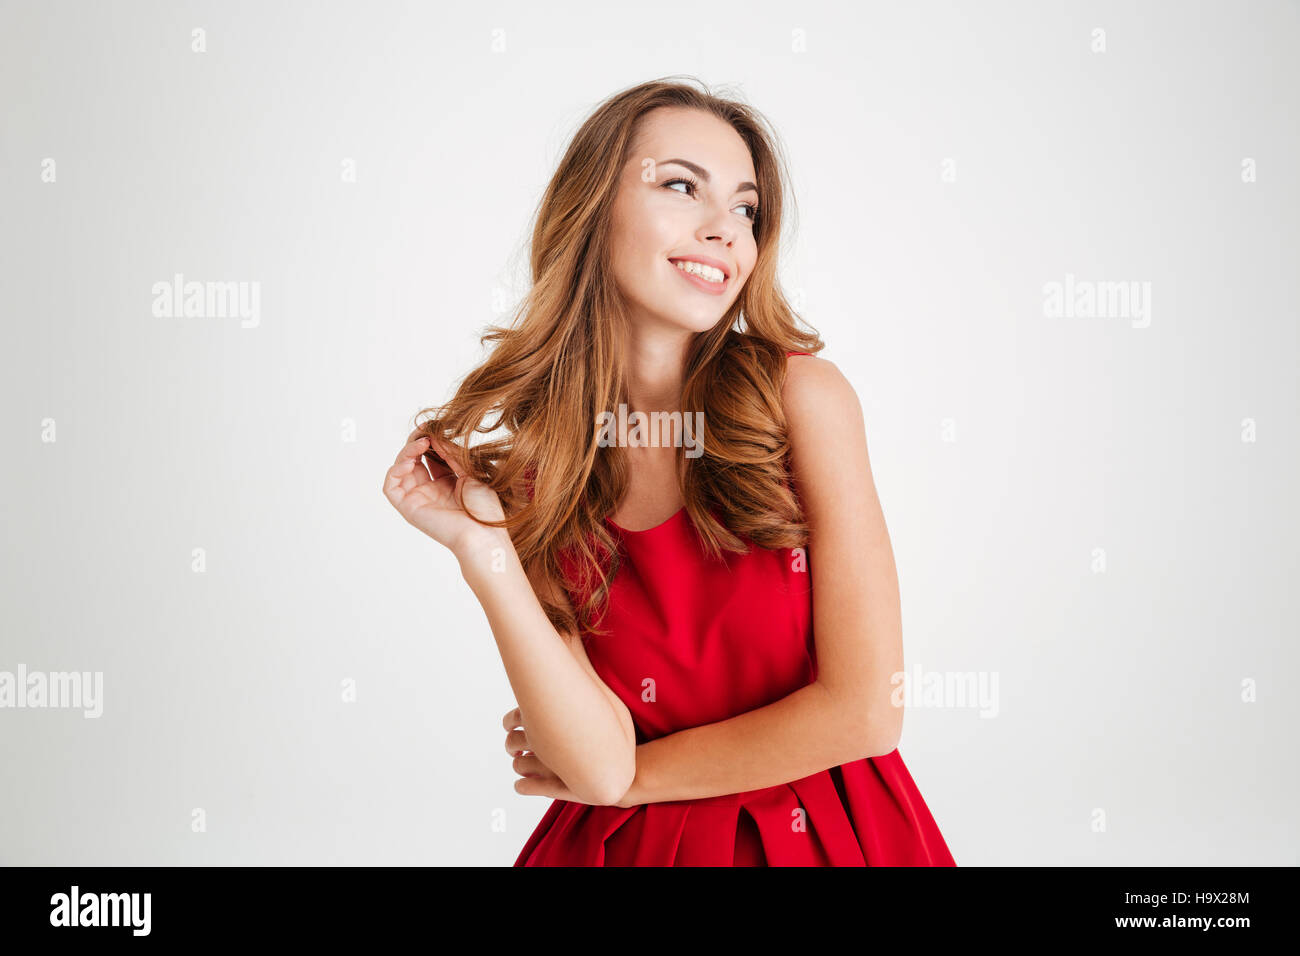 Portrait of a cheerful young brunette woman in red santa claus dress posing and looking away over white background Stock Photo